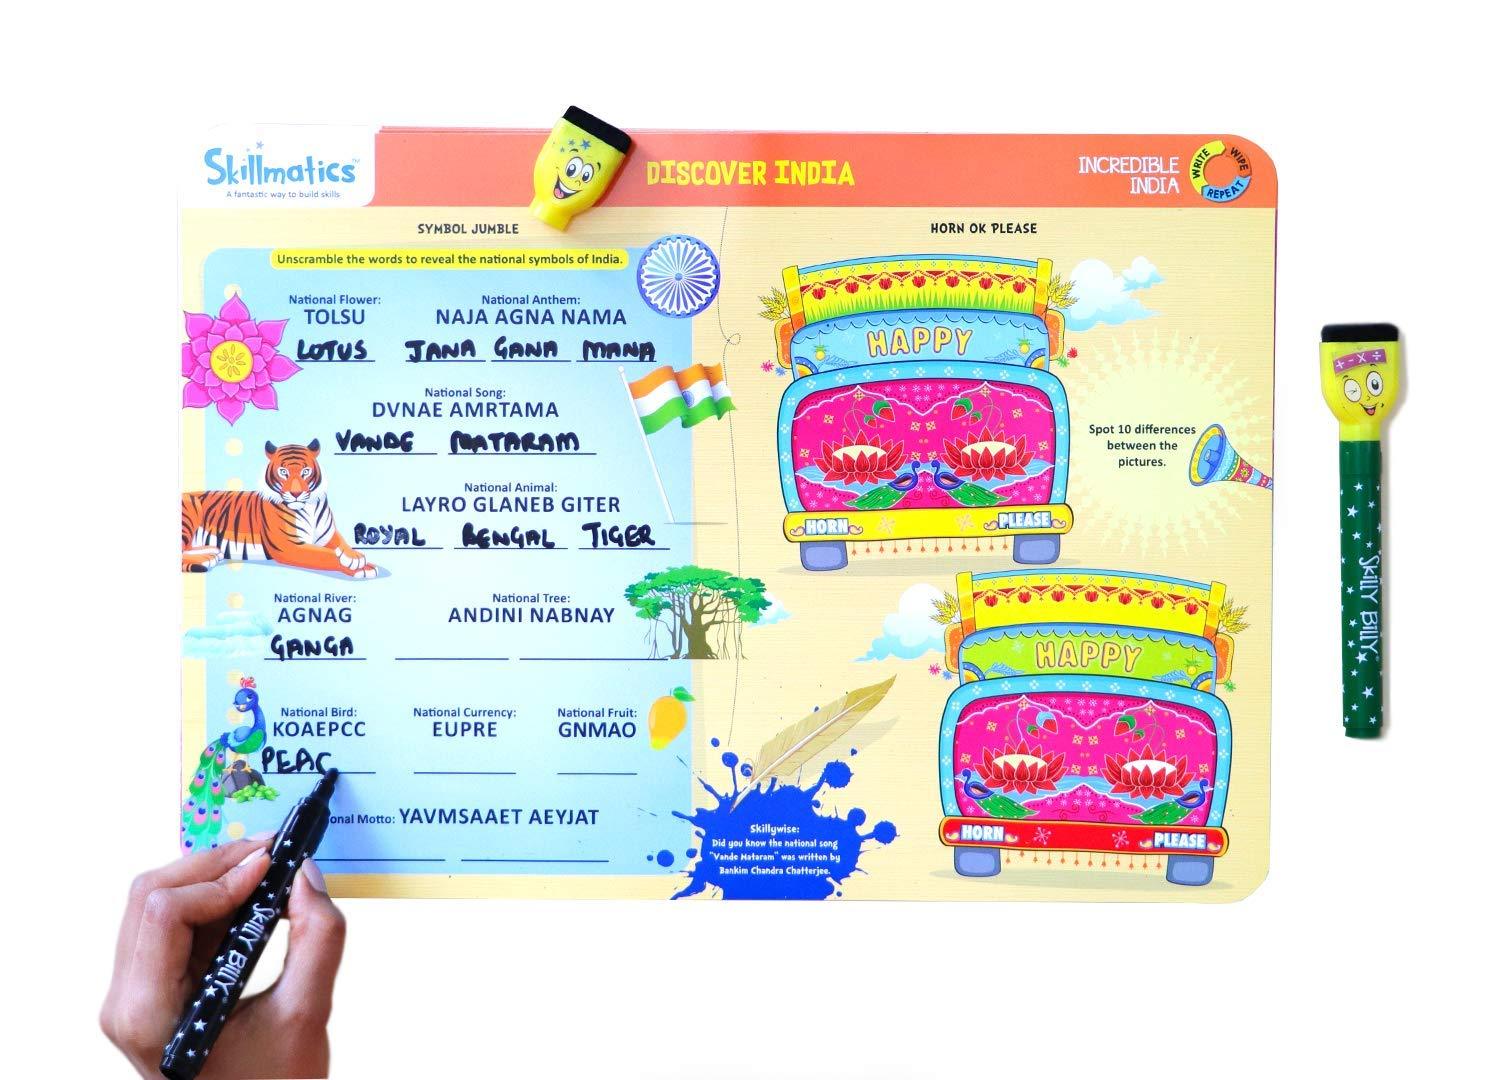 Skillmatics Educational Game : Incredible India Gifts & Learning Tools for Ages 6-9 Years